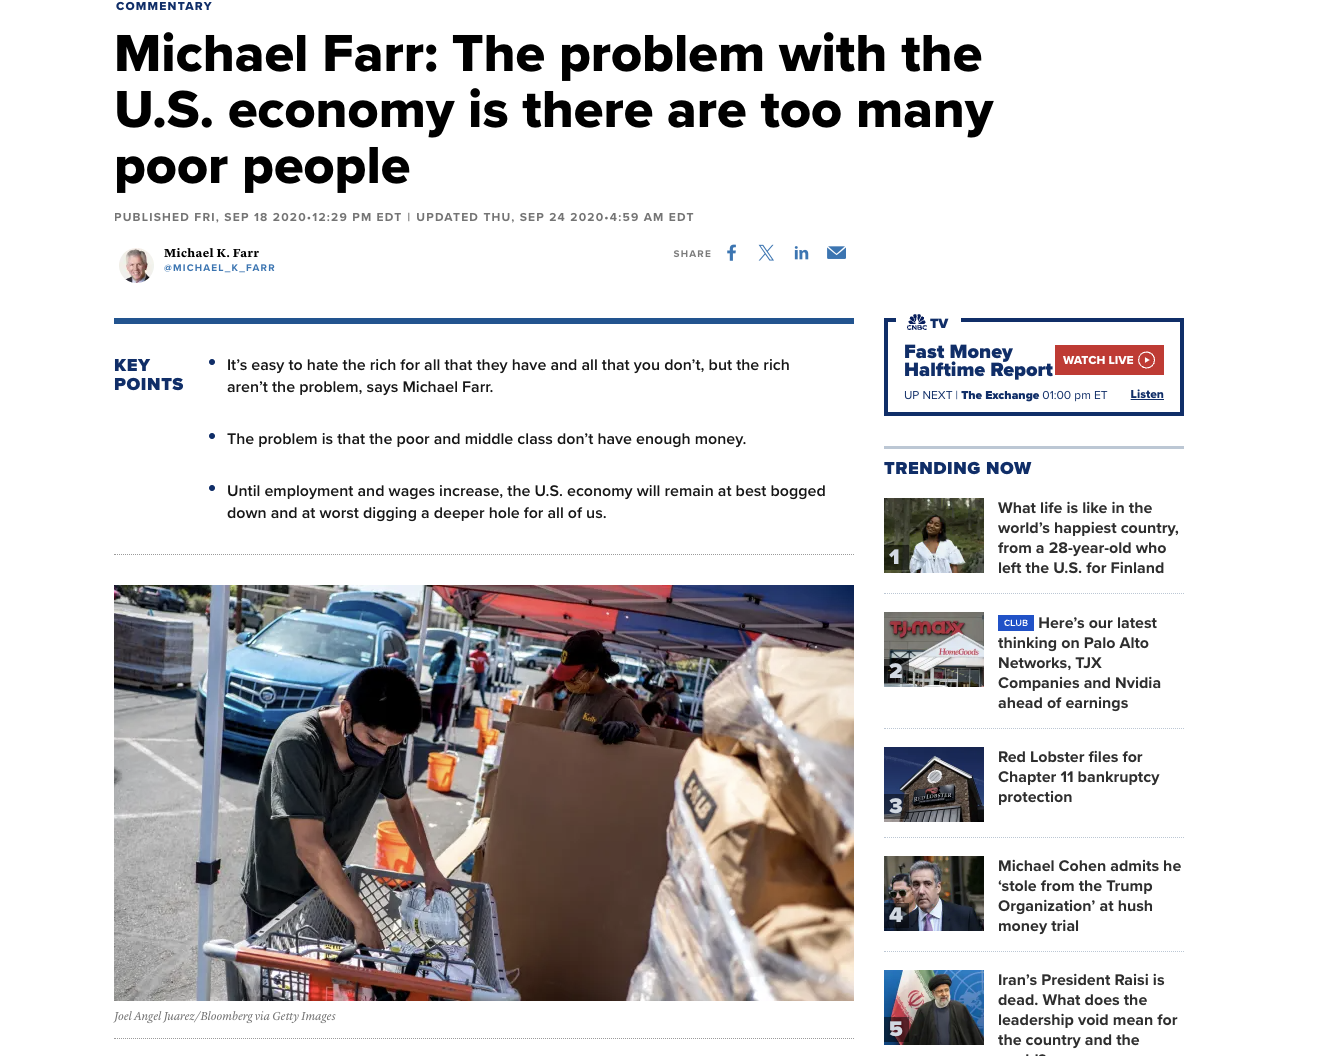 web page - Commentary Michael Farr The problem with the U.S. economy is there are too many poor people Published Fri. Edt Updated Thu, Edt Michael K. Farr f Xin Key Points It's easy to hate the rich for all that they have and all that you don't, but the r